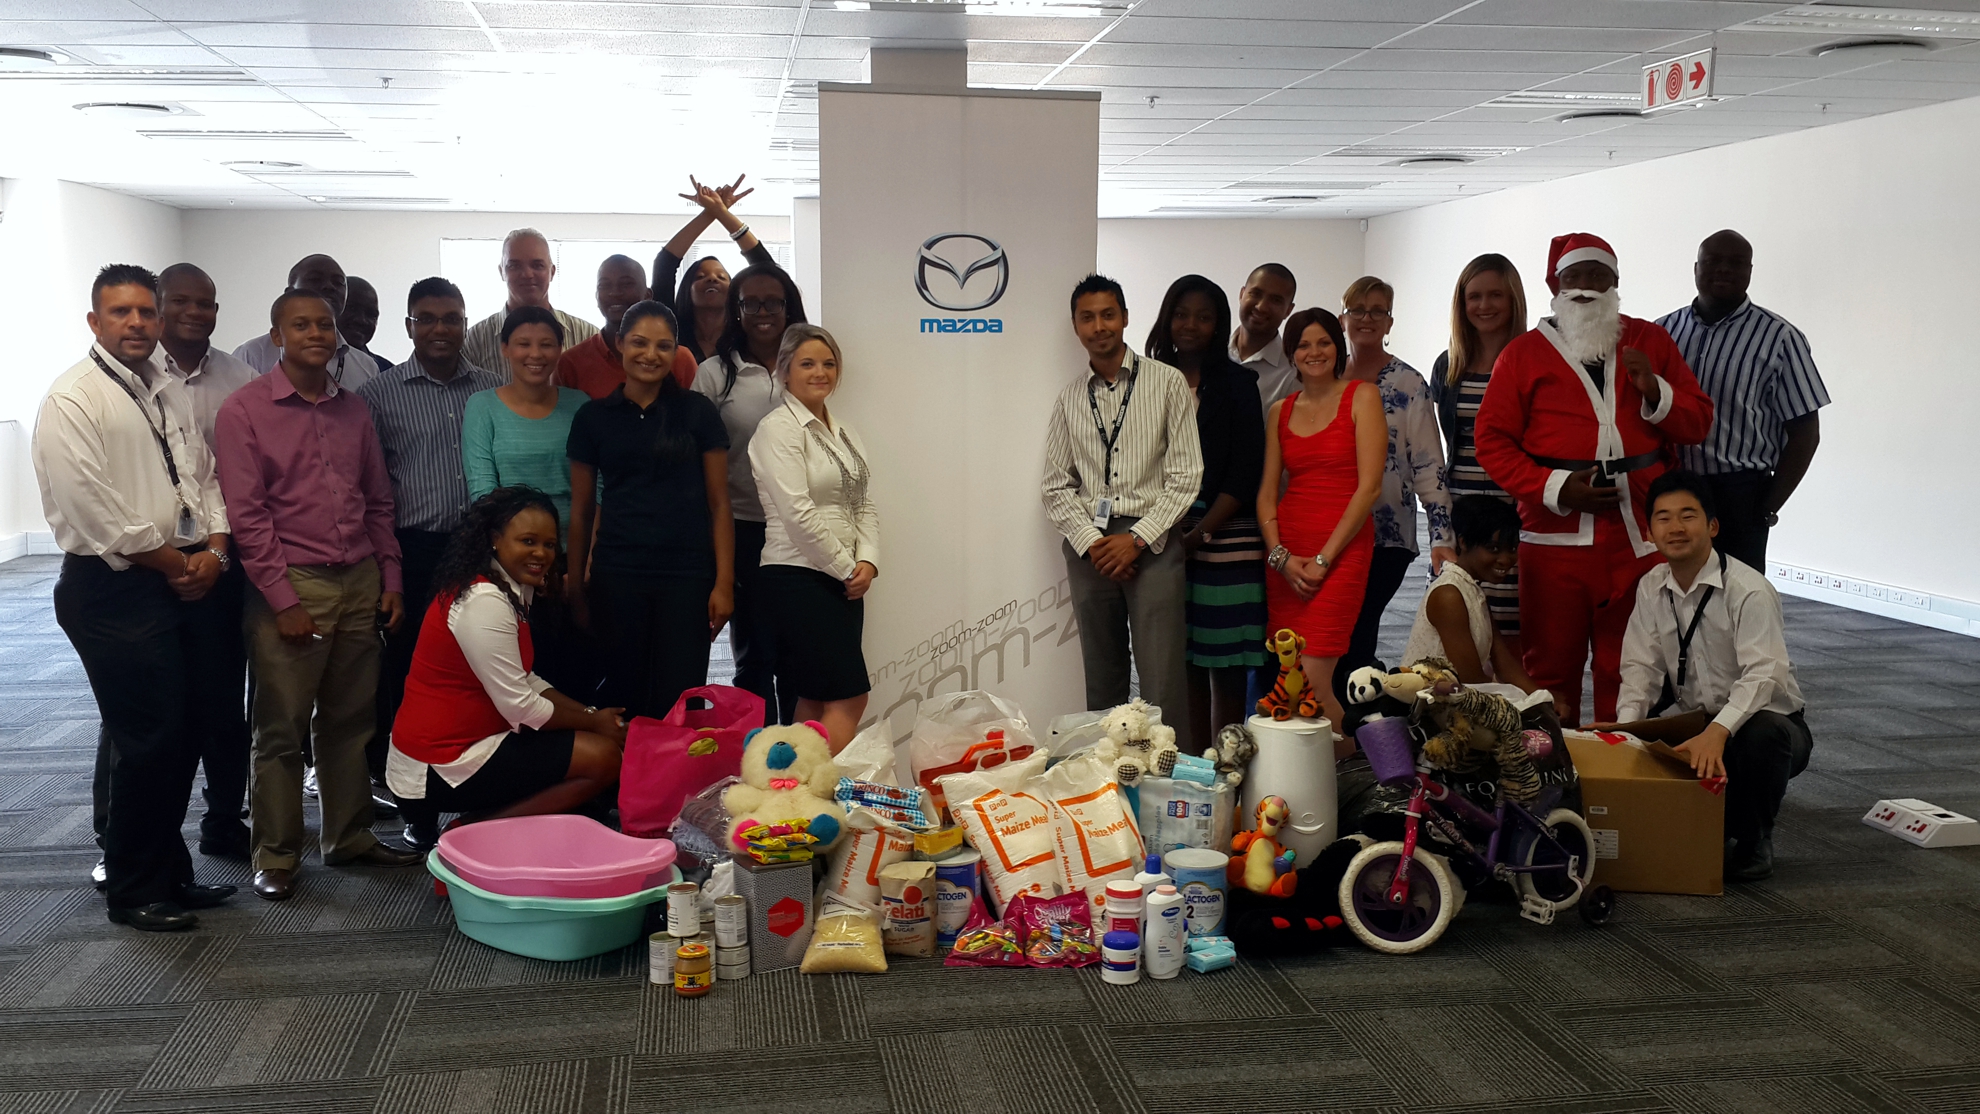 Mazda South Africa staff rally together to give back